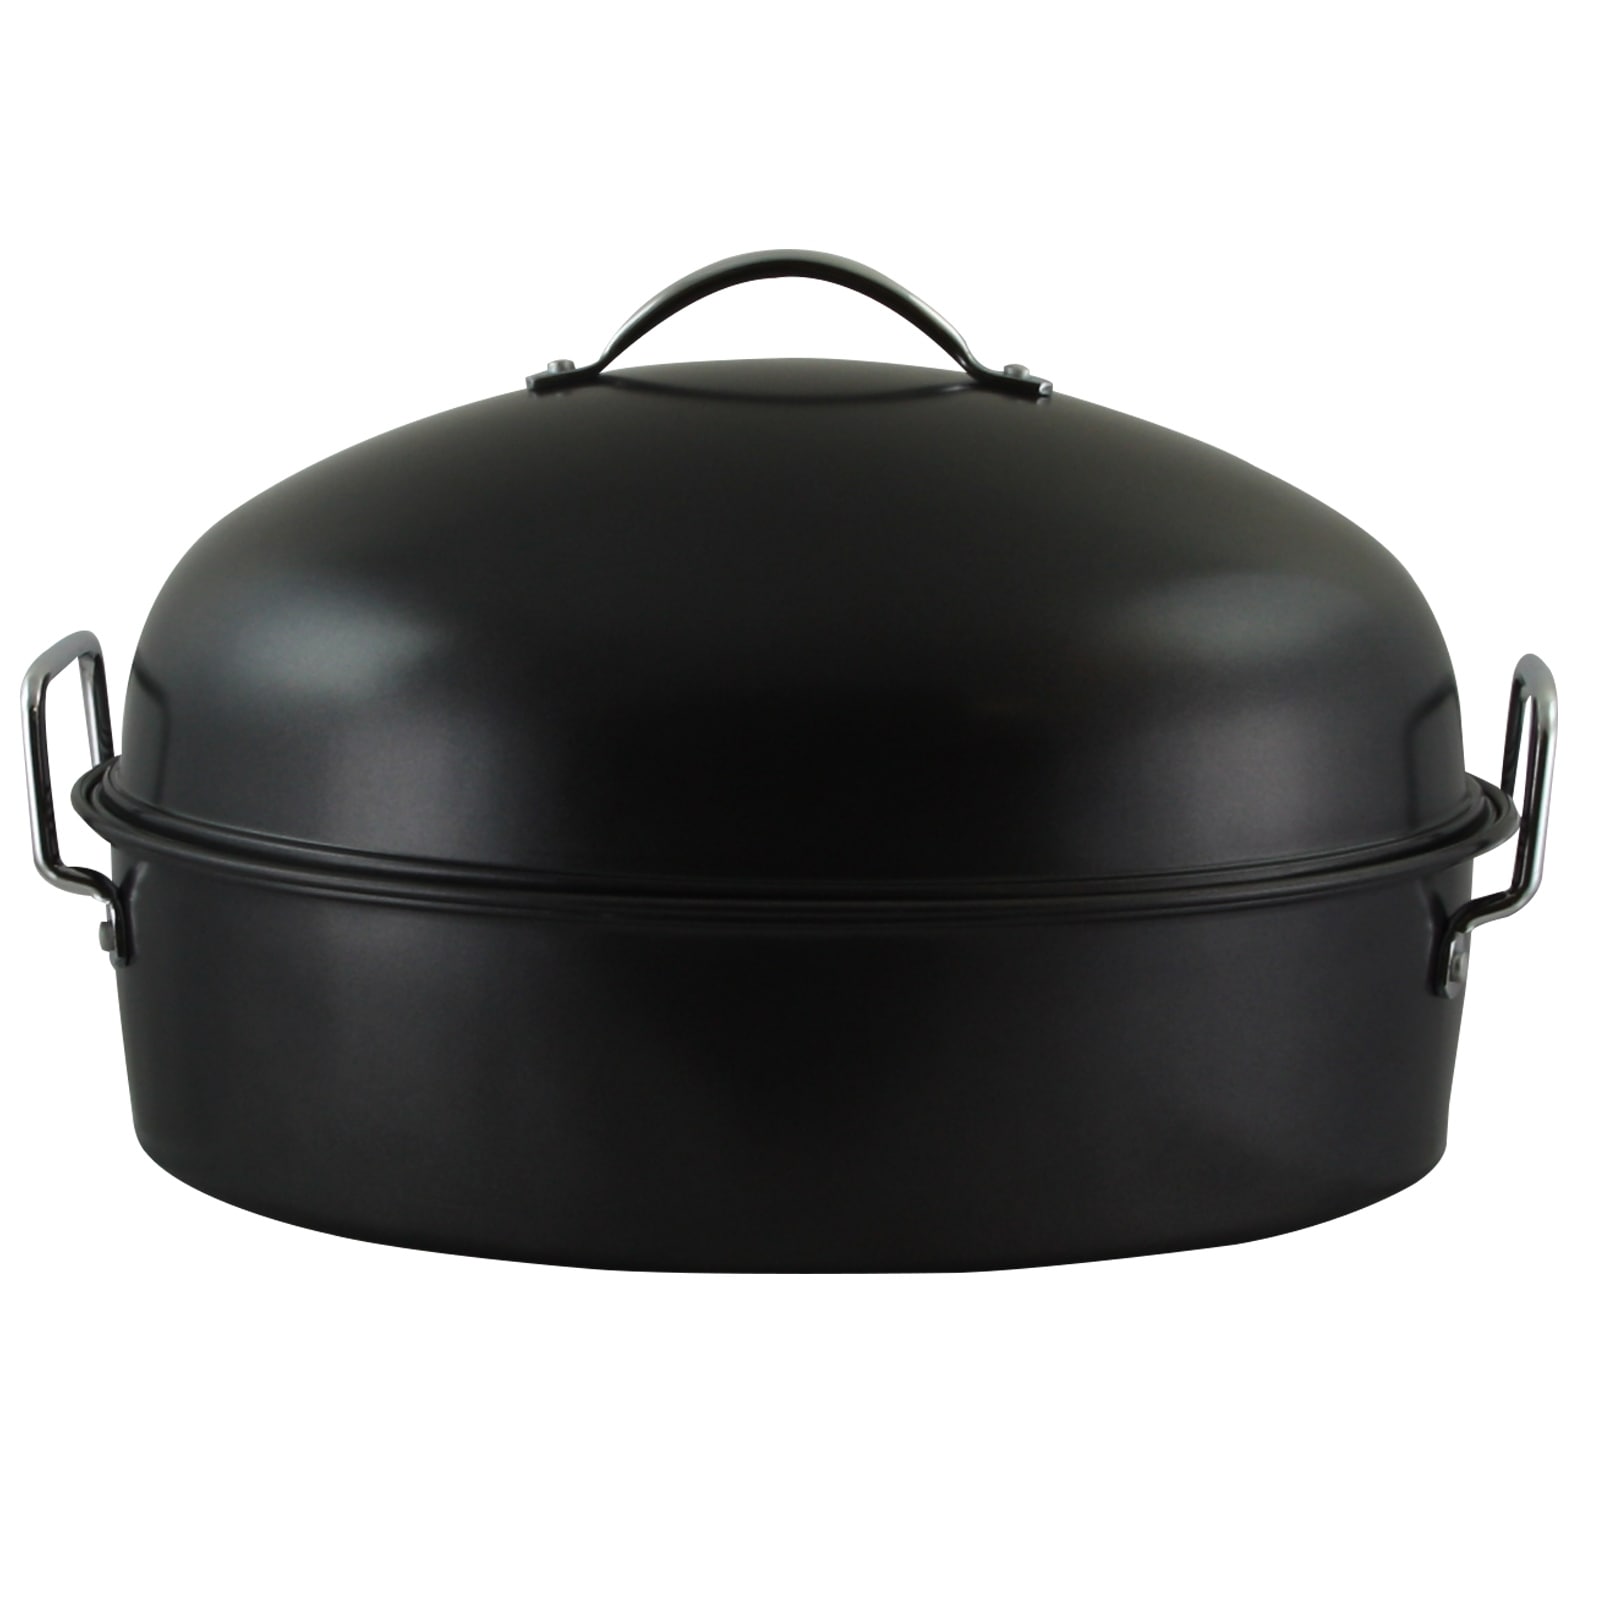 https://ak1.ostkcdn.com/images/products/is/images/direct/19a1bdc22c76395c7c08057d043a79211a34df43/Gibson-Home-Kenmar-High-Dome-Oval-Roaster-Set-in-Black.jpg